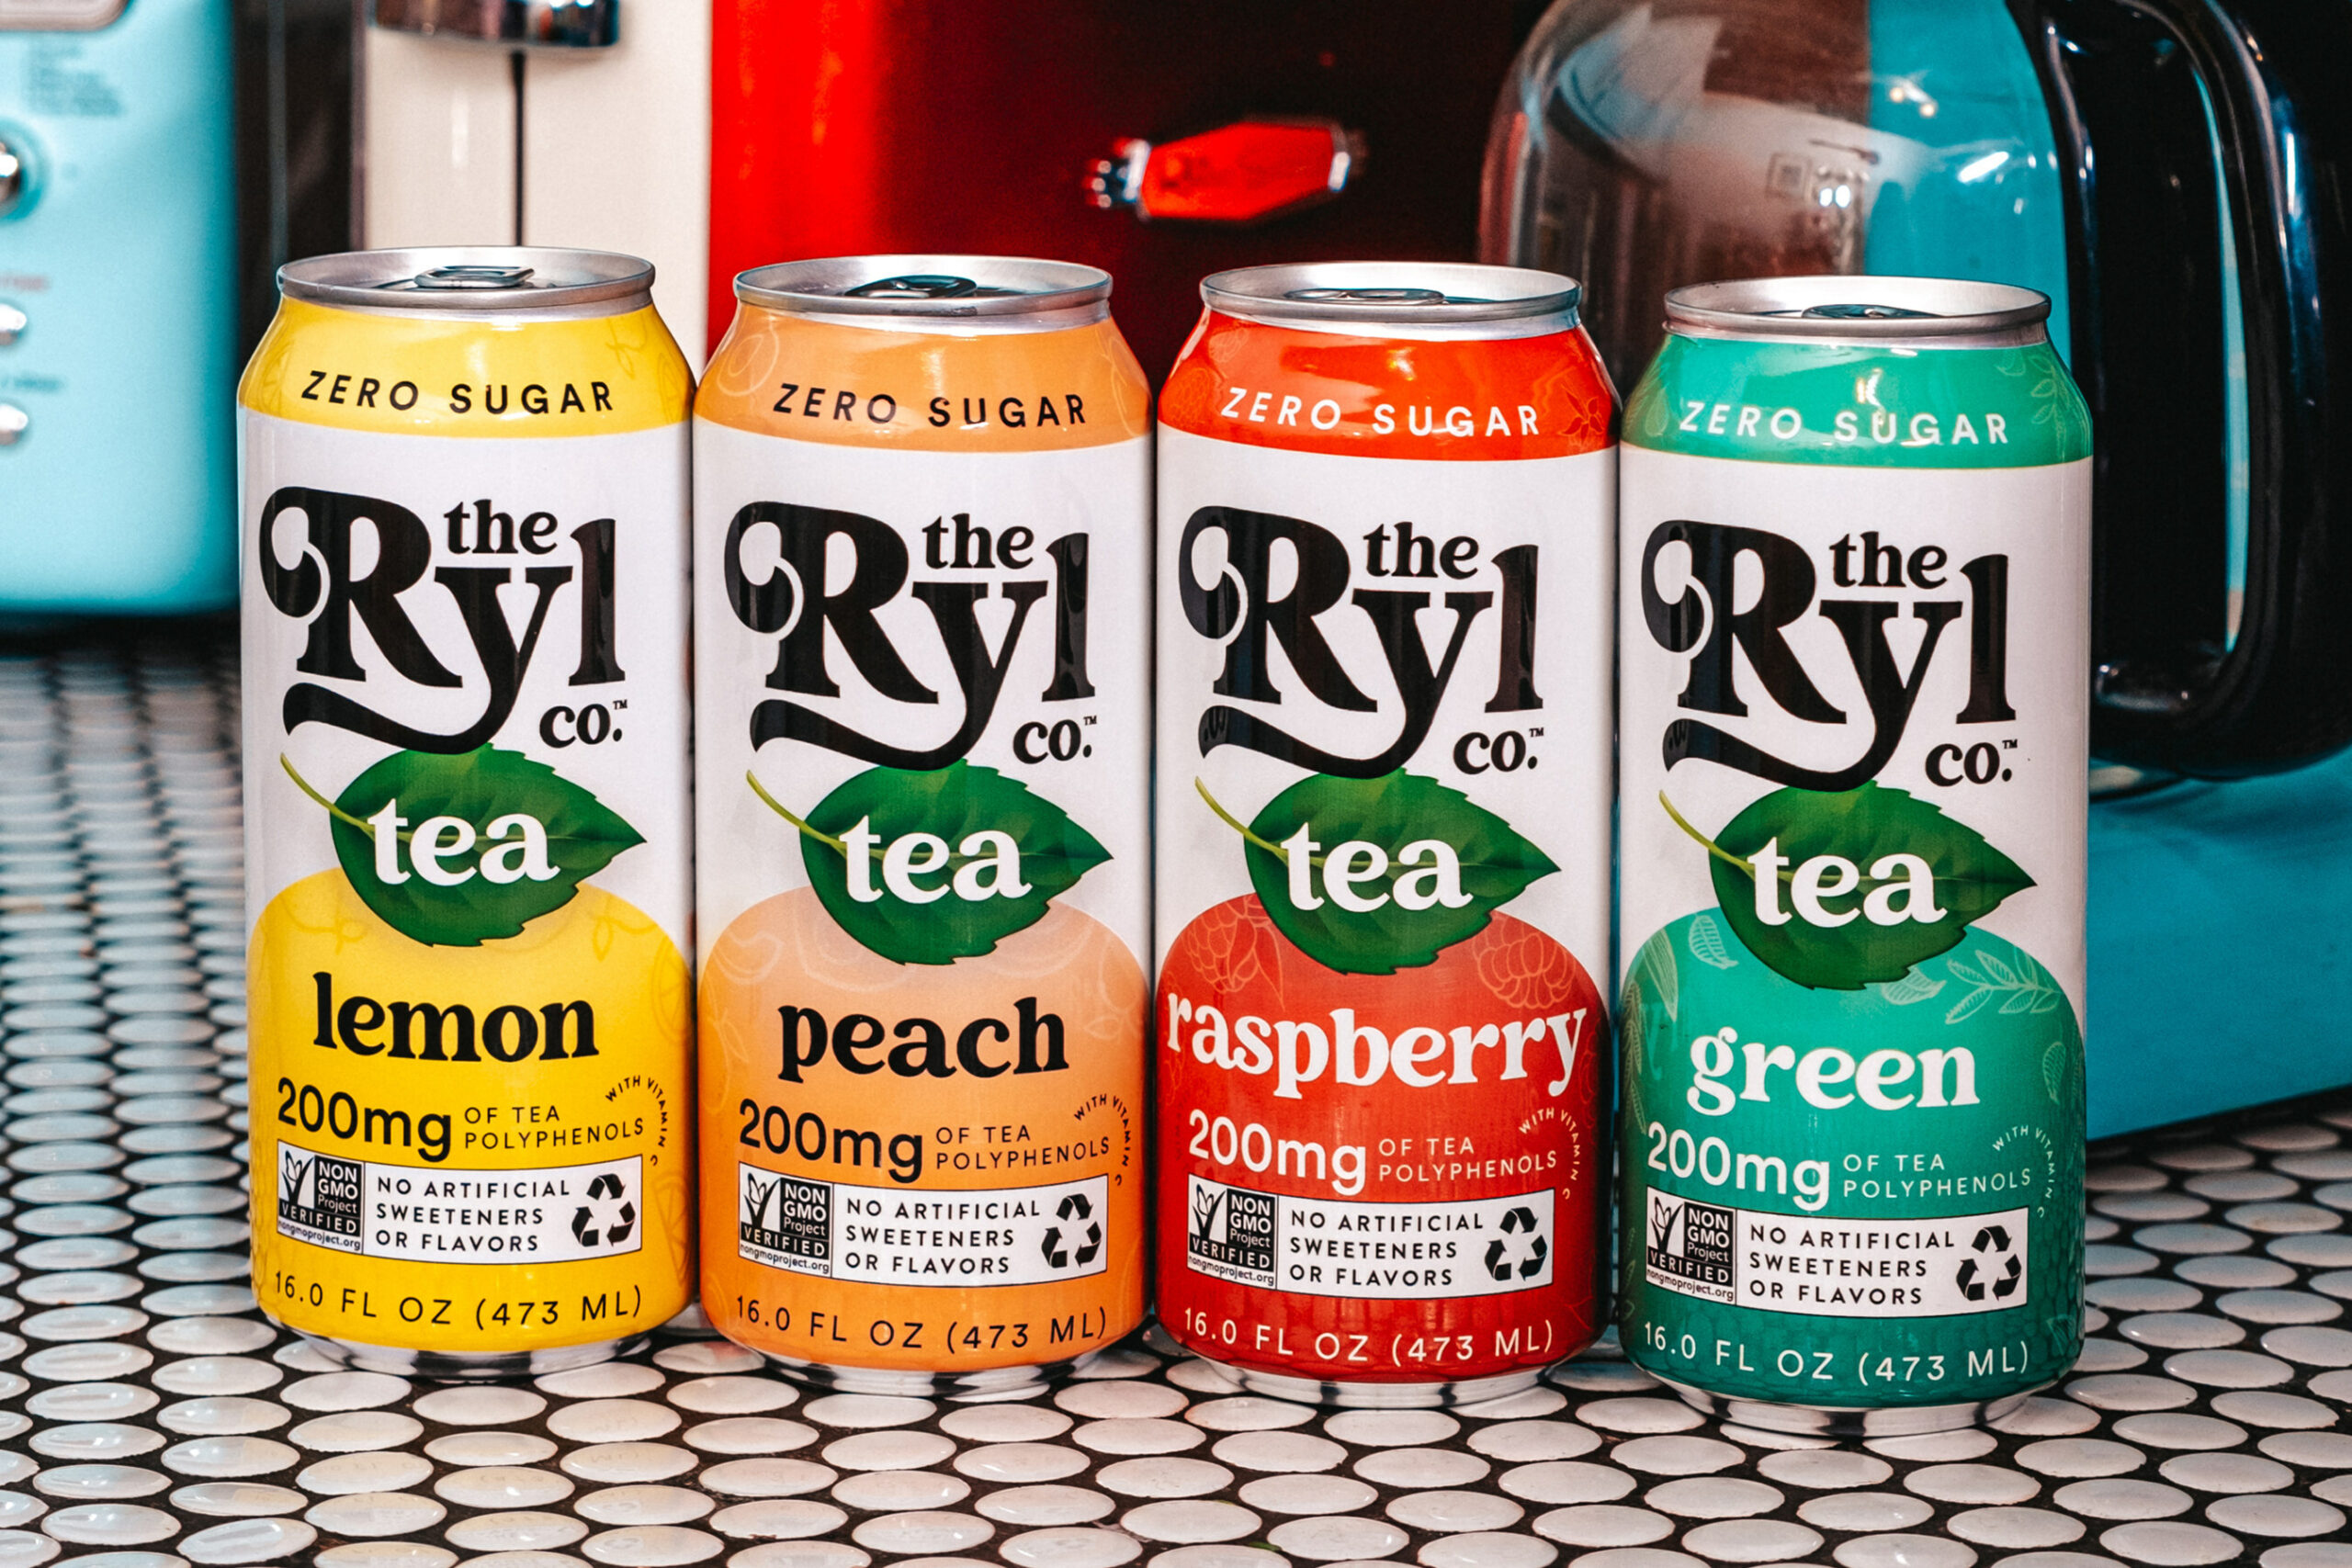 THE RYL COMPANY™ DEBUTS FUNCTIONAL TEA LINE COMBINING DELICIOUS ICED TEA FLAVOR WITH CONSISTENT, TRANSPARENT STEEPED TEA HEALTH BENEFITS IN SUSTAINABLE PACKAGING